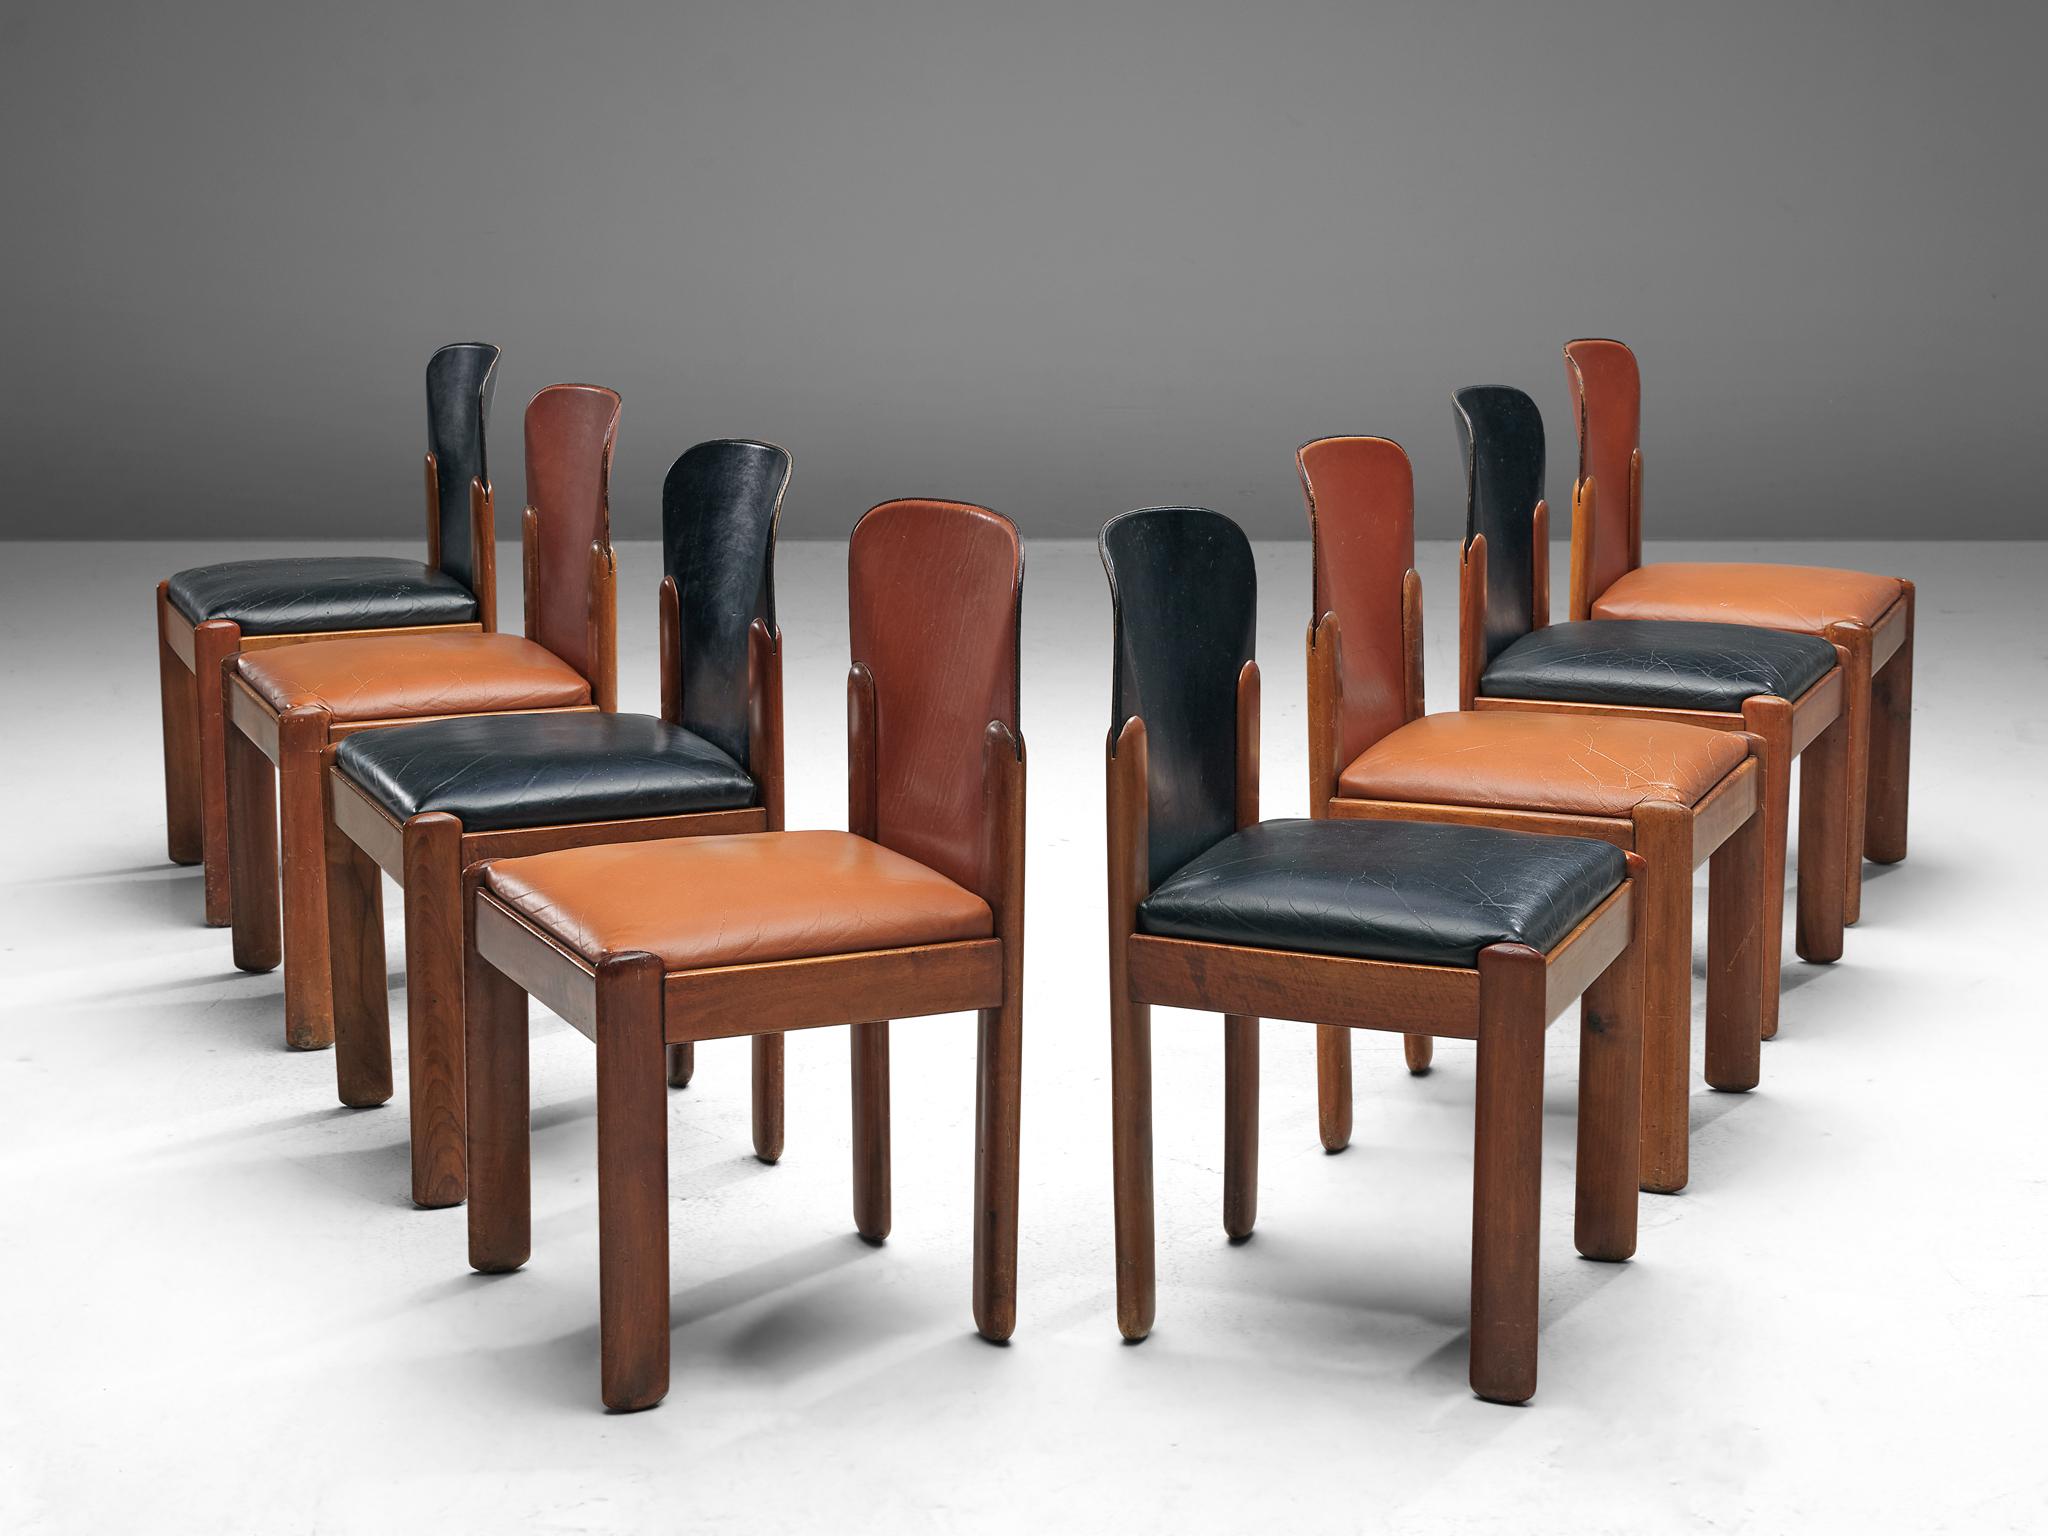 Silvio Coppola for Bernini, set of eight dining chairs model 330, leather, stained beech, Italy, 1960s.

This magnificent set of eight dining chairs by the renowned Italian designer Silvio Coppola is a remarkable display of aesthetic harmony,